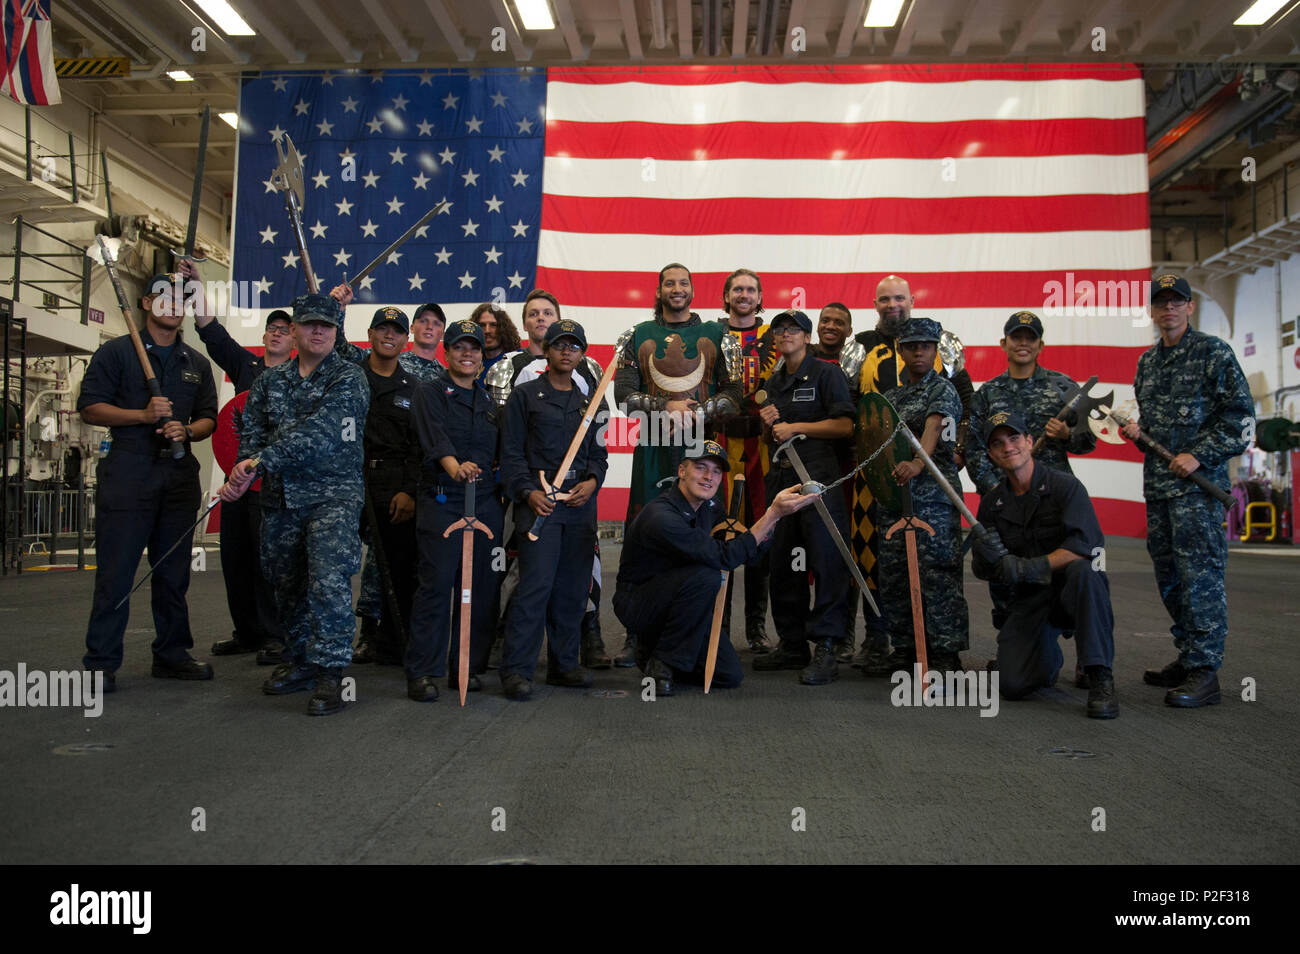 160901-N-MZ309-139 SAN PEDRO, California (Sept. 1, 2016) – Knights from the family dinner theater restaurant Medieval Times pose for a photo with Sailors assigned to amphibious assault ship USS America (LHA 6) in the ship’s hangar bay during the inaugural Los Angeles Fleet Week. Fleet week offers the public an opportunity to tour ships, meet Sailors, Marines, and members of the Coast Guard and gain a better understanding of how the sea service support the national defense of the United States and freedom of the seas. (U.S. Navy photo by Mass Communication Specialist 1st Class Ryan Riley/Releas Stock Photo